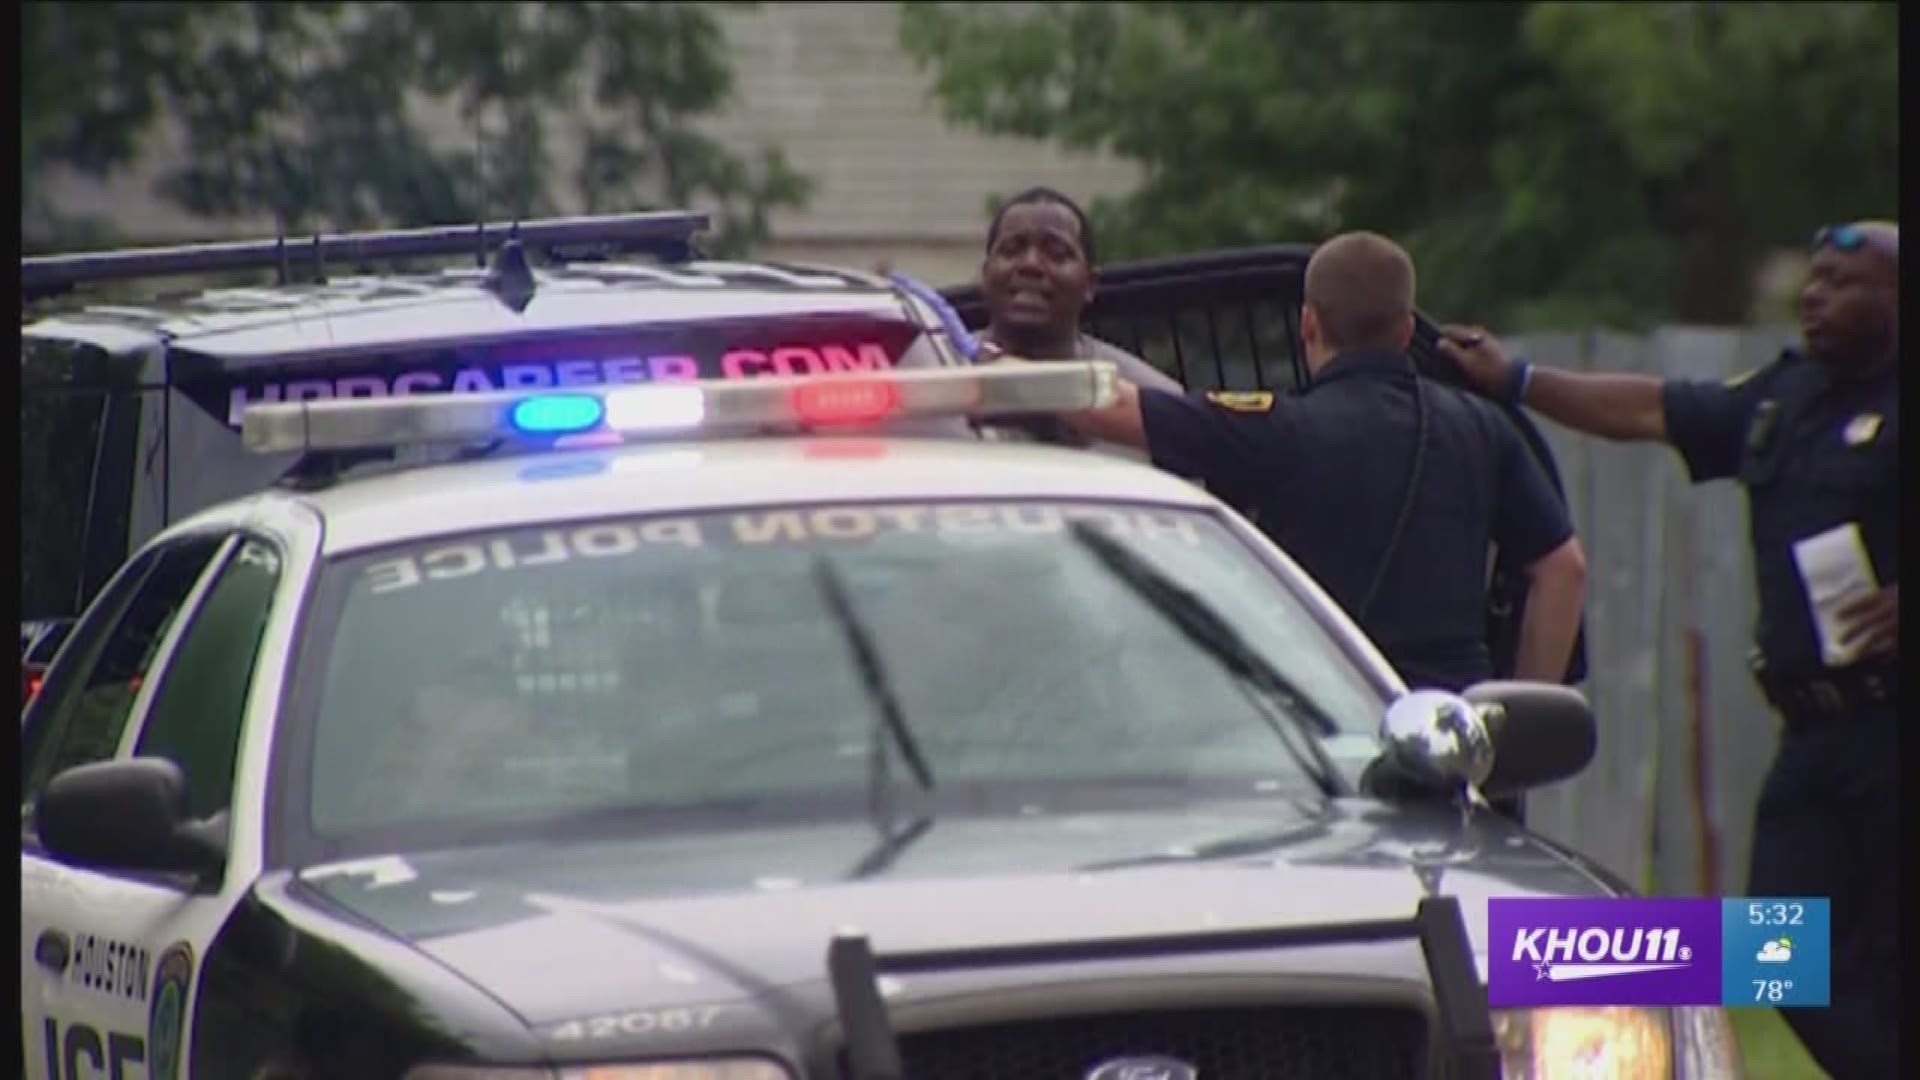 Police said a 2-year-old child is dead after an accidental shooting in northwest Houston Sunday afternoon.